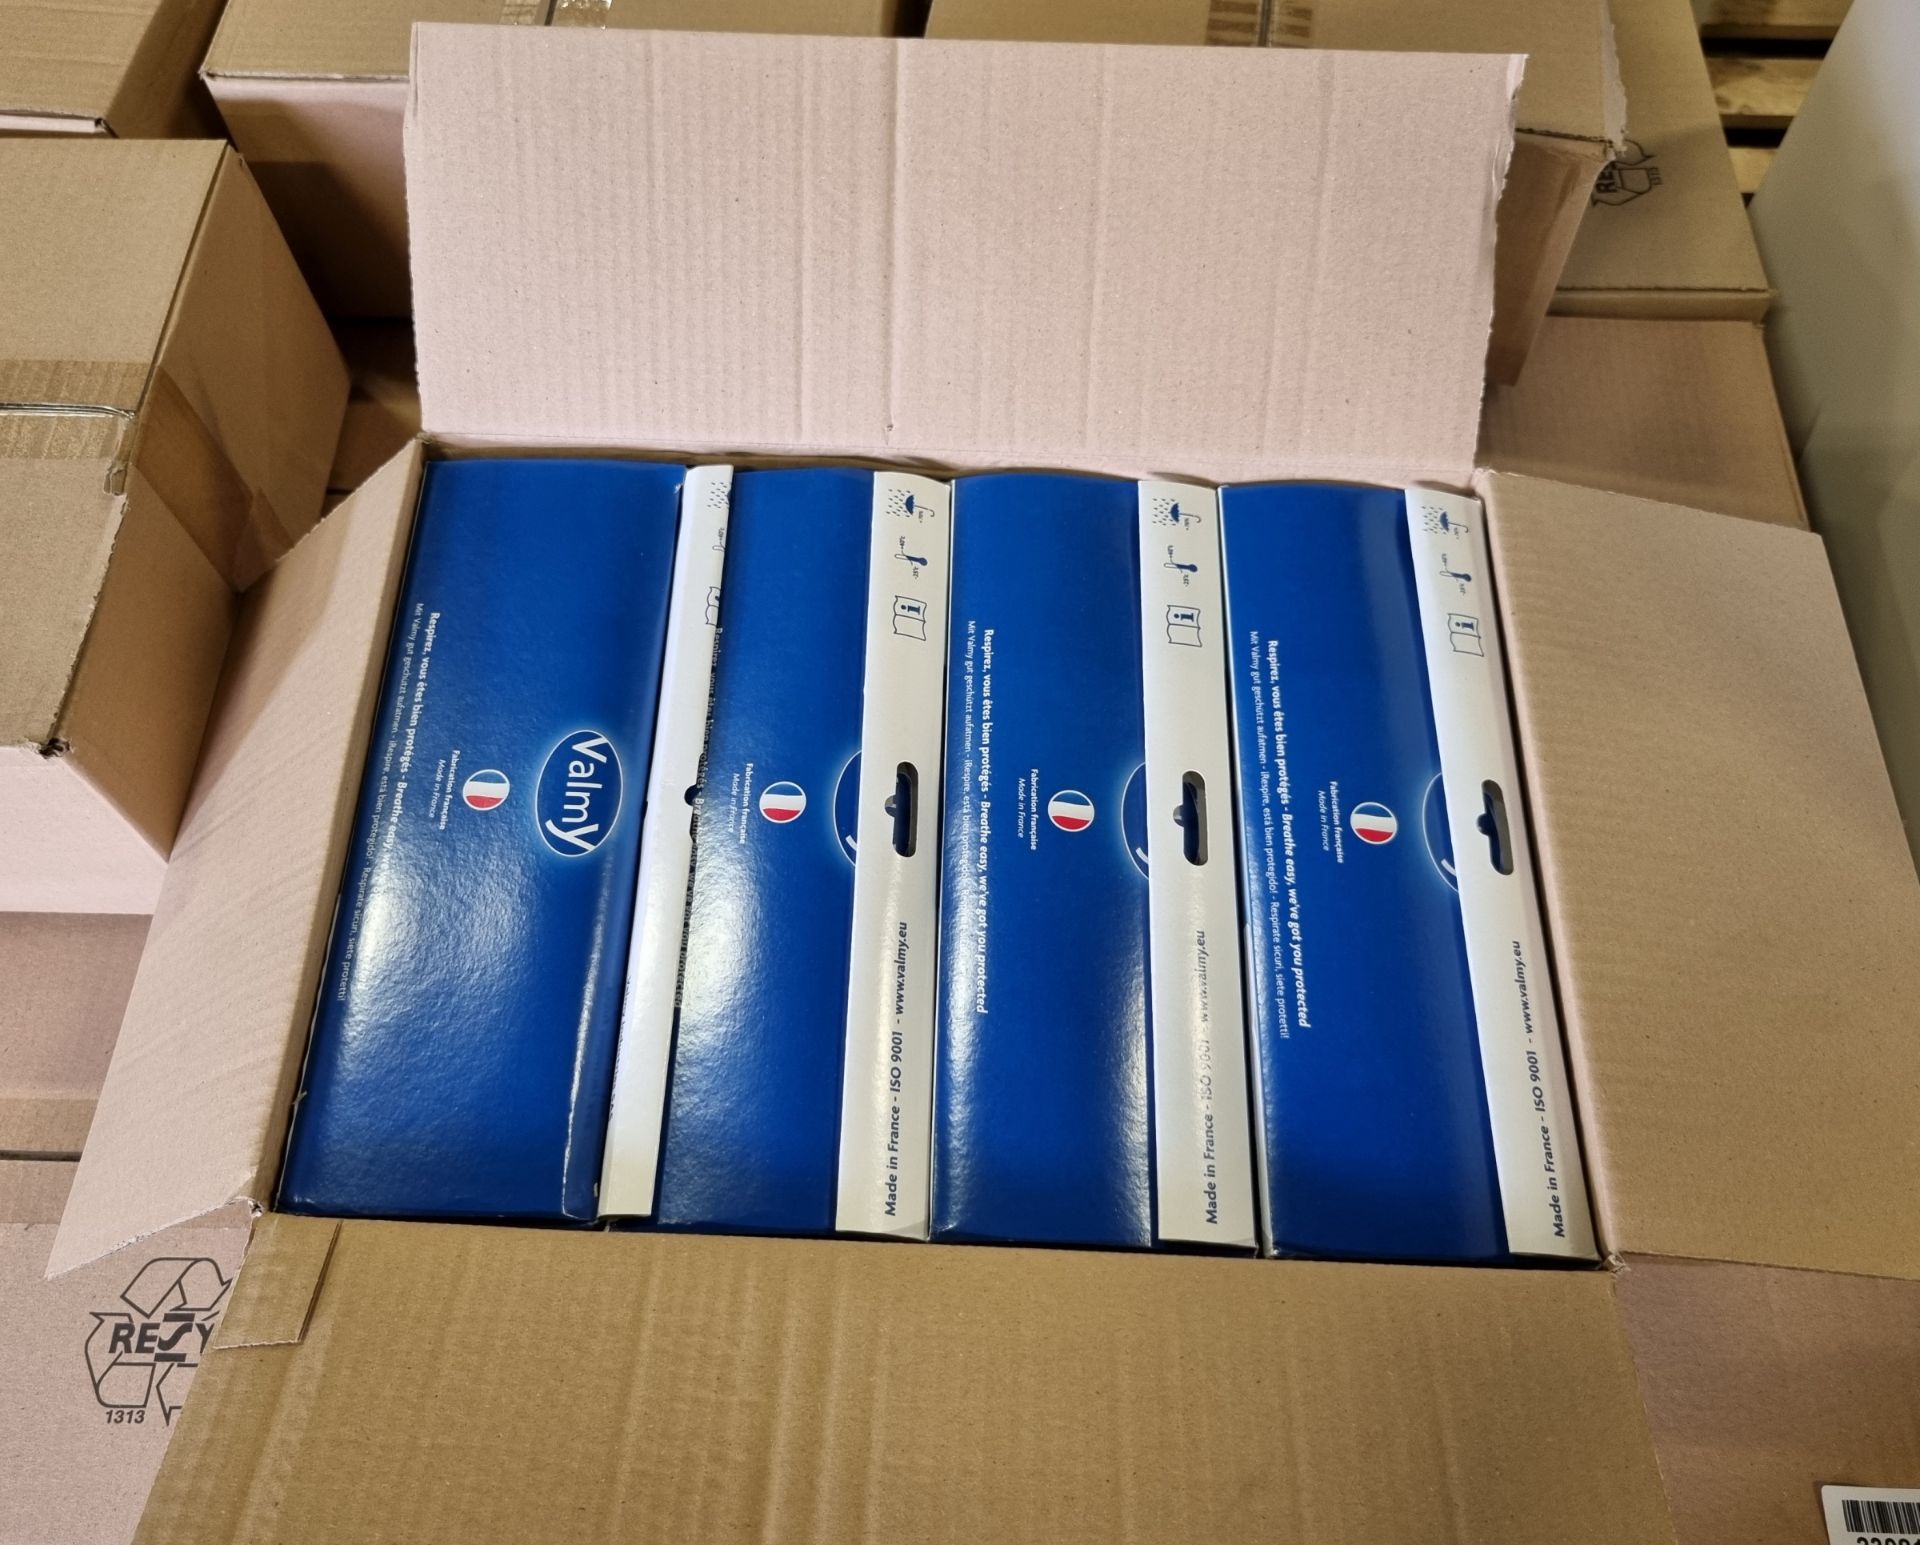 55x boxes of Blue FFP2 - respiratory protection masks - 4x packs of 25 masks per box - Image 3 of 6